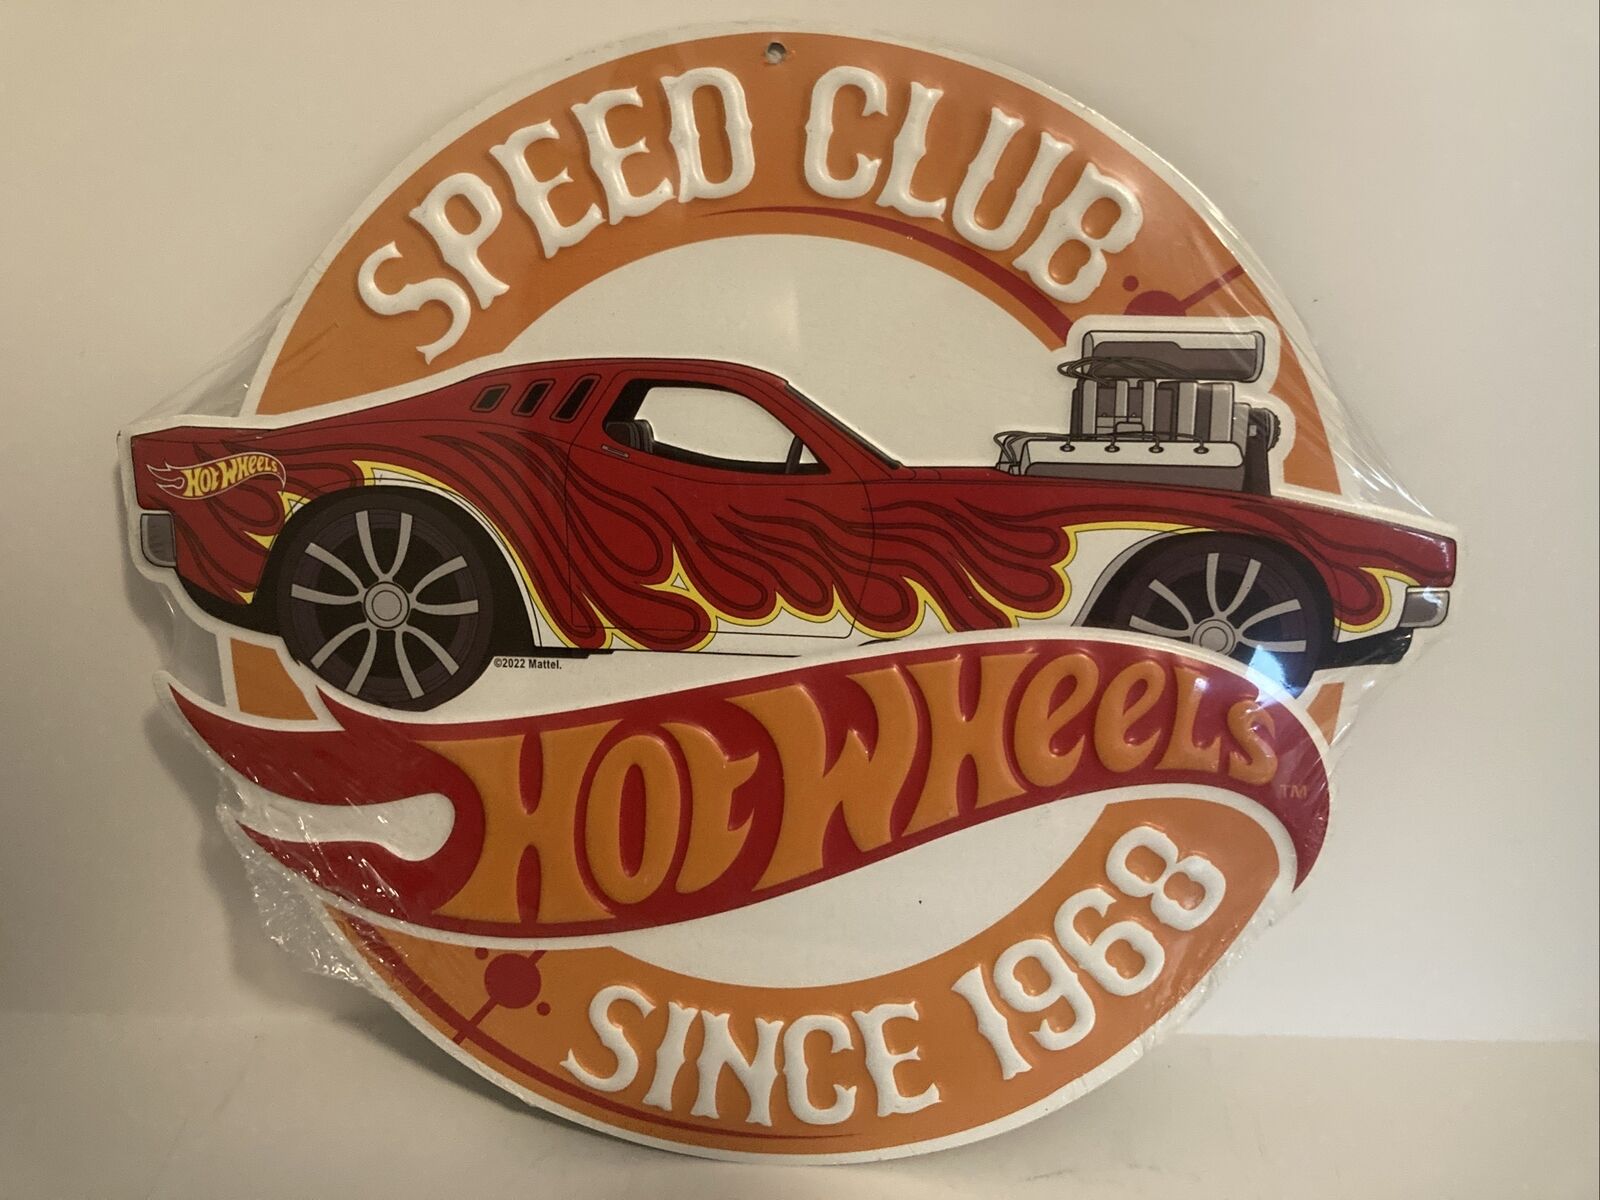 NEW 12” Hot Wheels Speed Club Vintage Style Metal Sign Rodger Dodger Since 1968